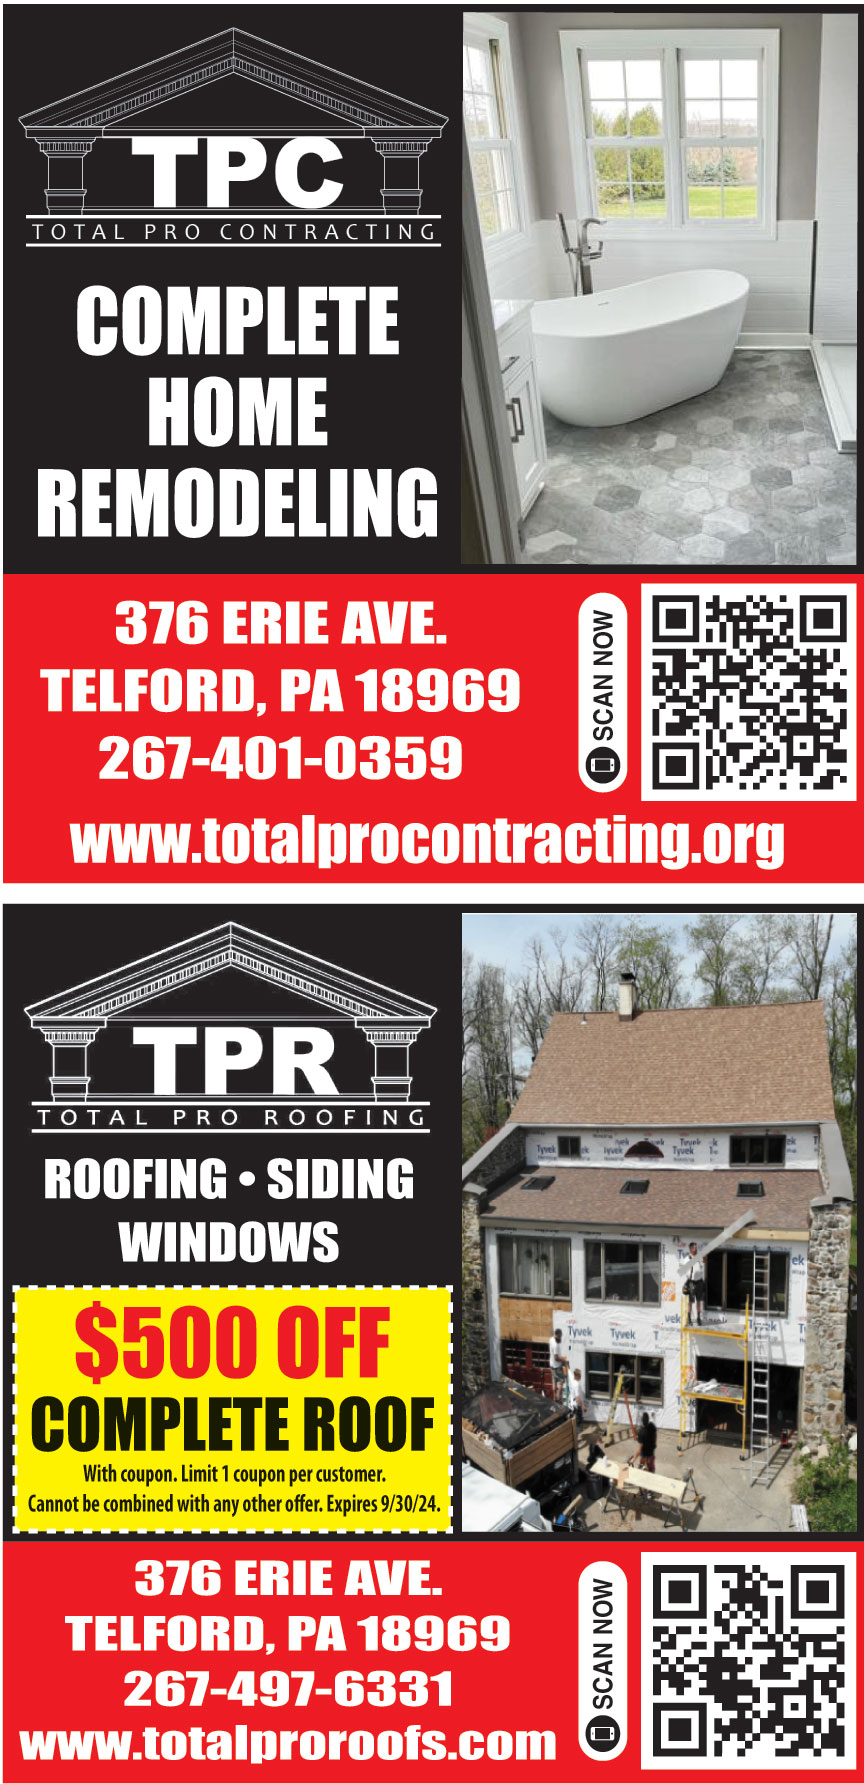 TOTAL PRO CONTRACTING